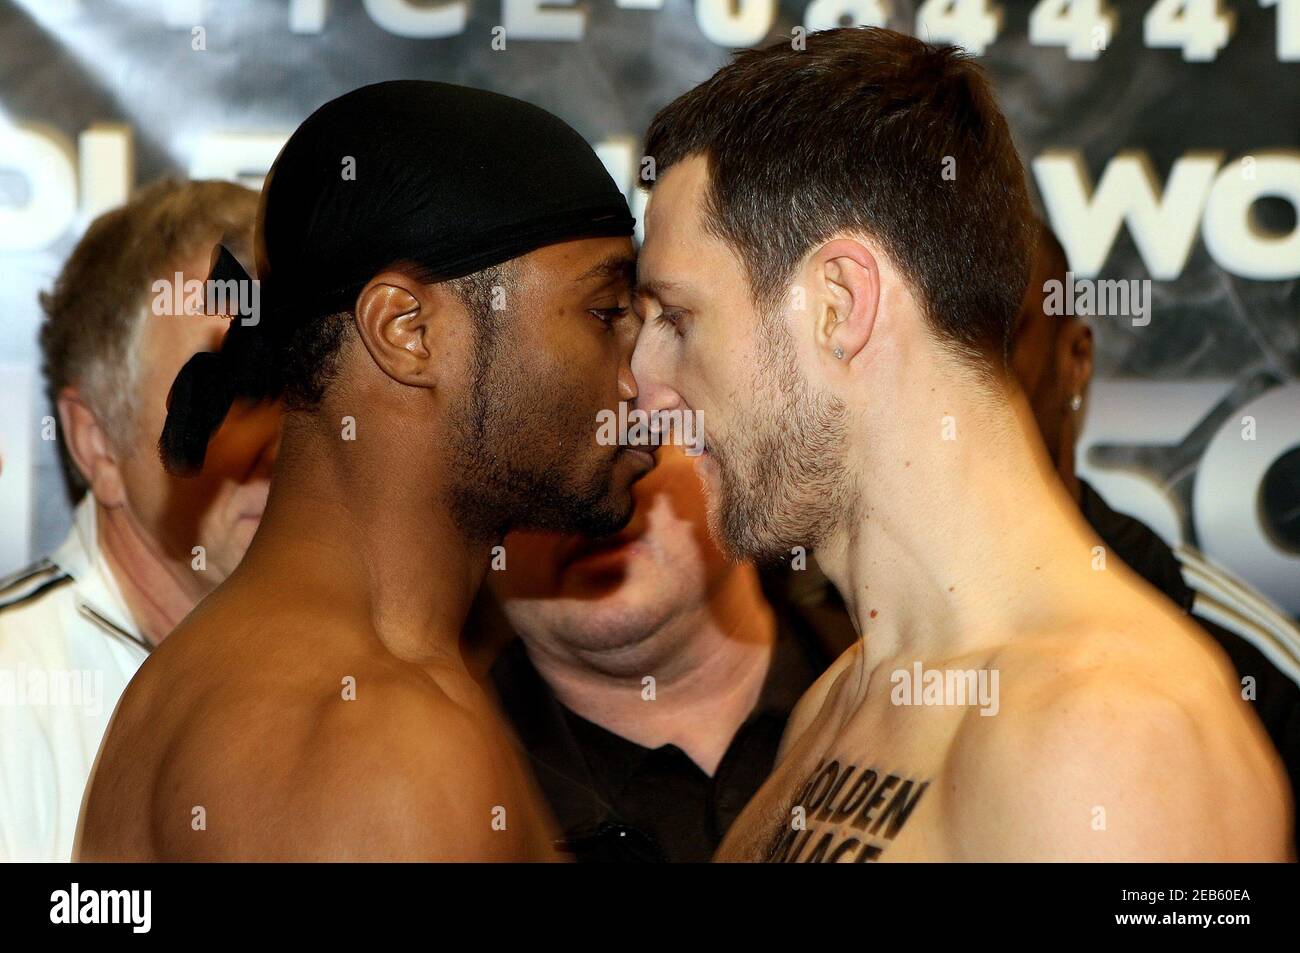 Boxing - Carl Froch & Jean Pascal Weigh-In - Victoria Shopping Centre, Nottingham, NG1 3QN - 5/12/08  Jean Pascal (L) and Carl Froch during the Weigh In  Mandatory Credit: Action Images / Scott Heavey  Livepic Stock Photo